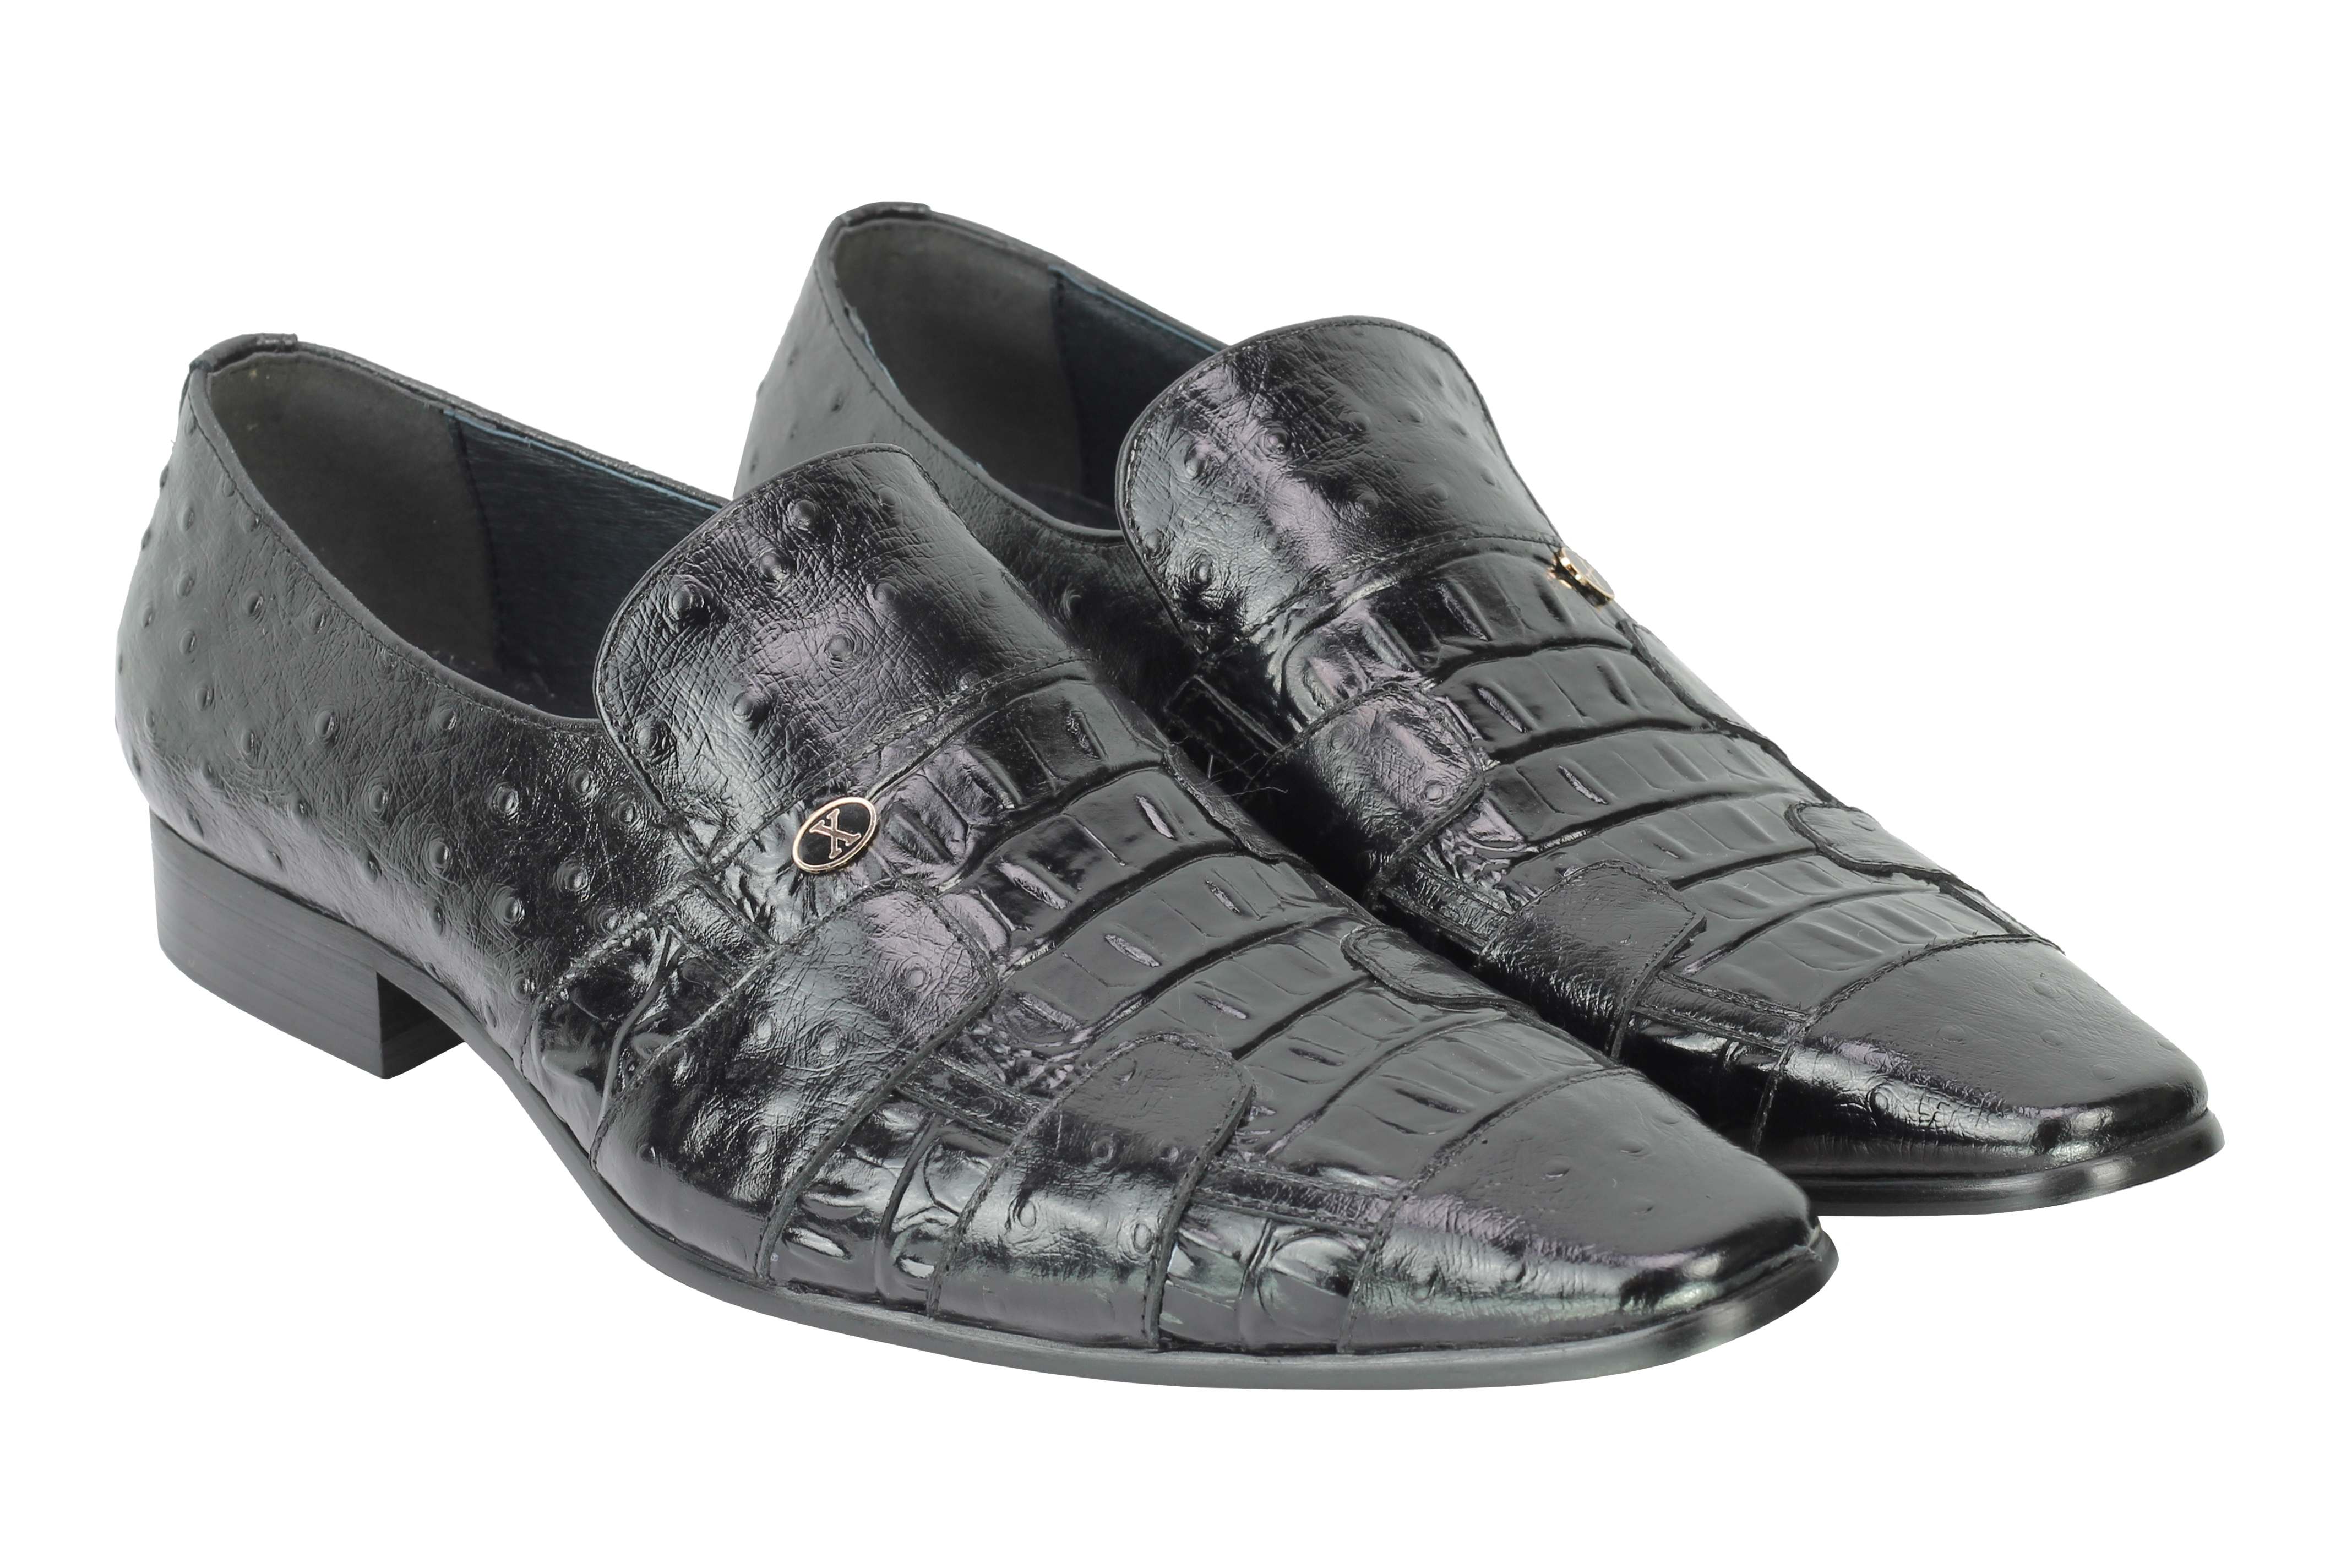 Mens 2 Tone Polished Real Leather Snakeskin Print Slip on Dress Party ...